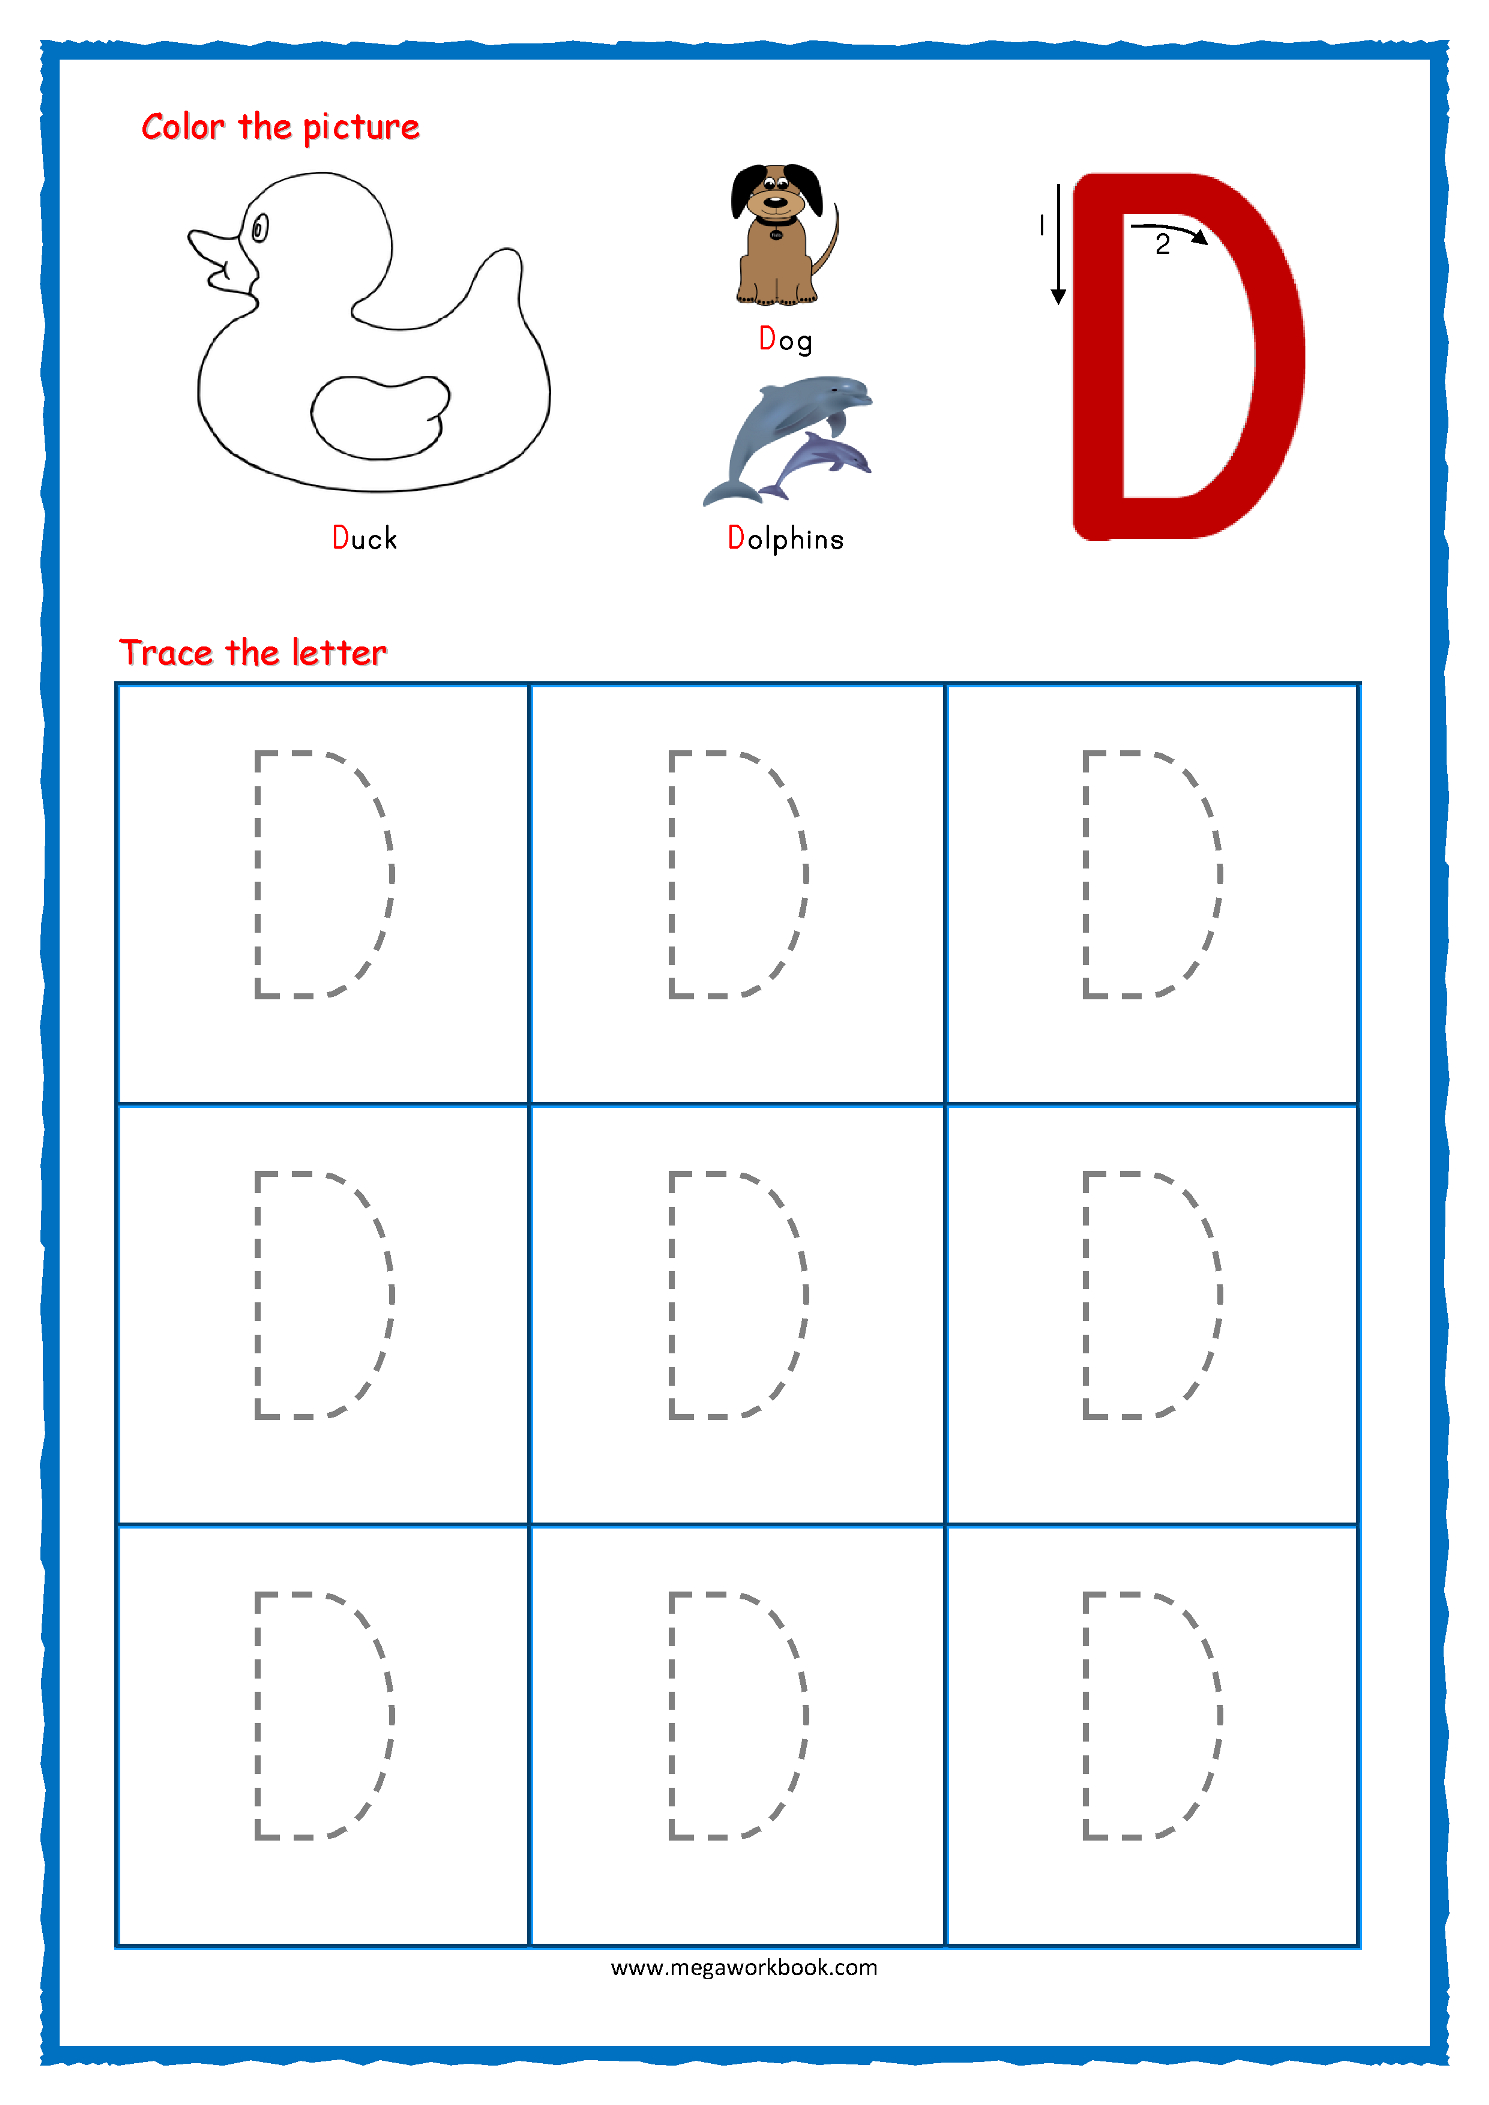 Tracing Letters - Alphabet Tracing - Capital Letters regarding Tracing Letters Az